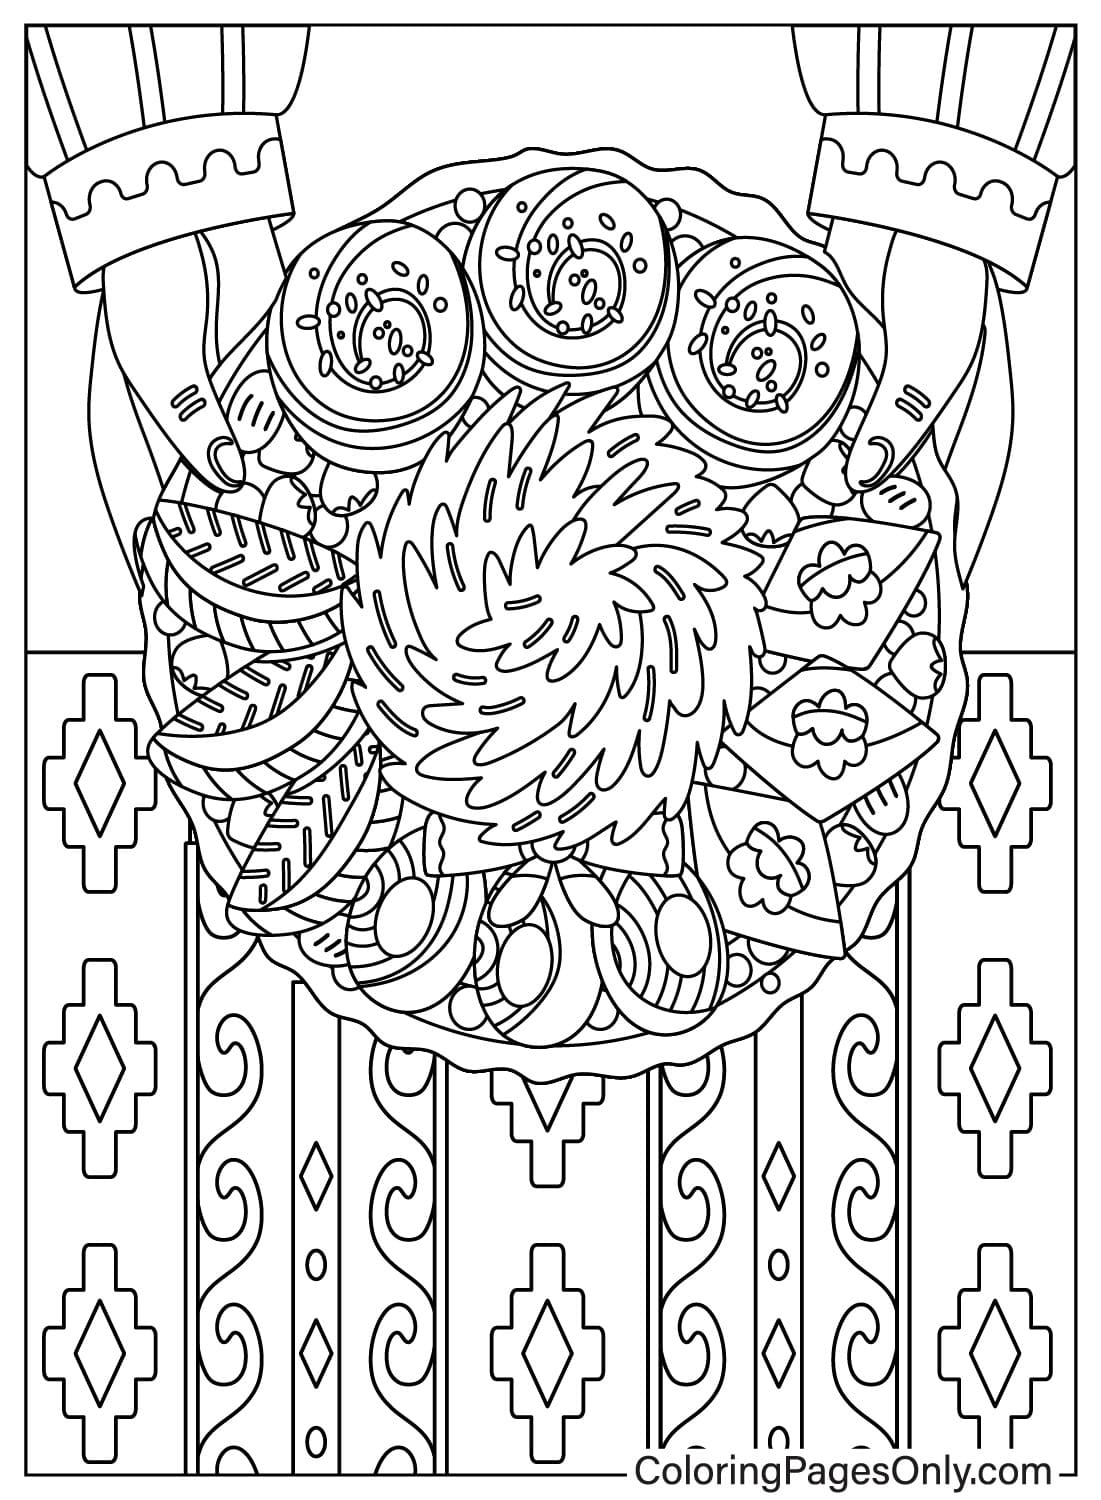 Nowruz Day Food Coloring Page from International Nowruz Day